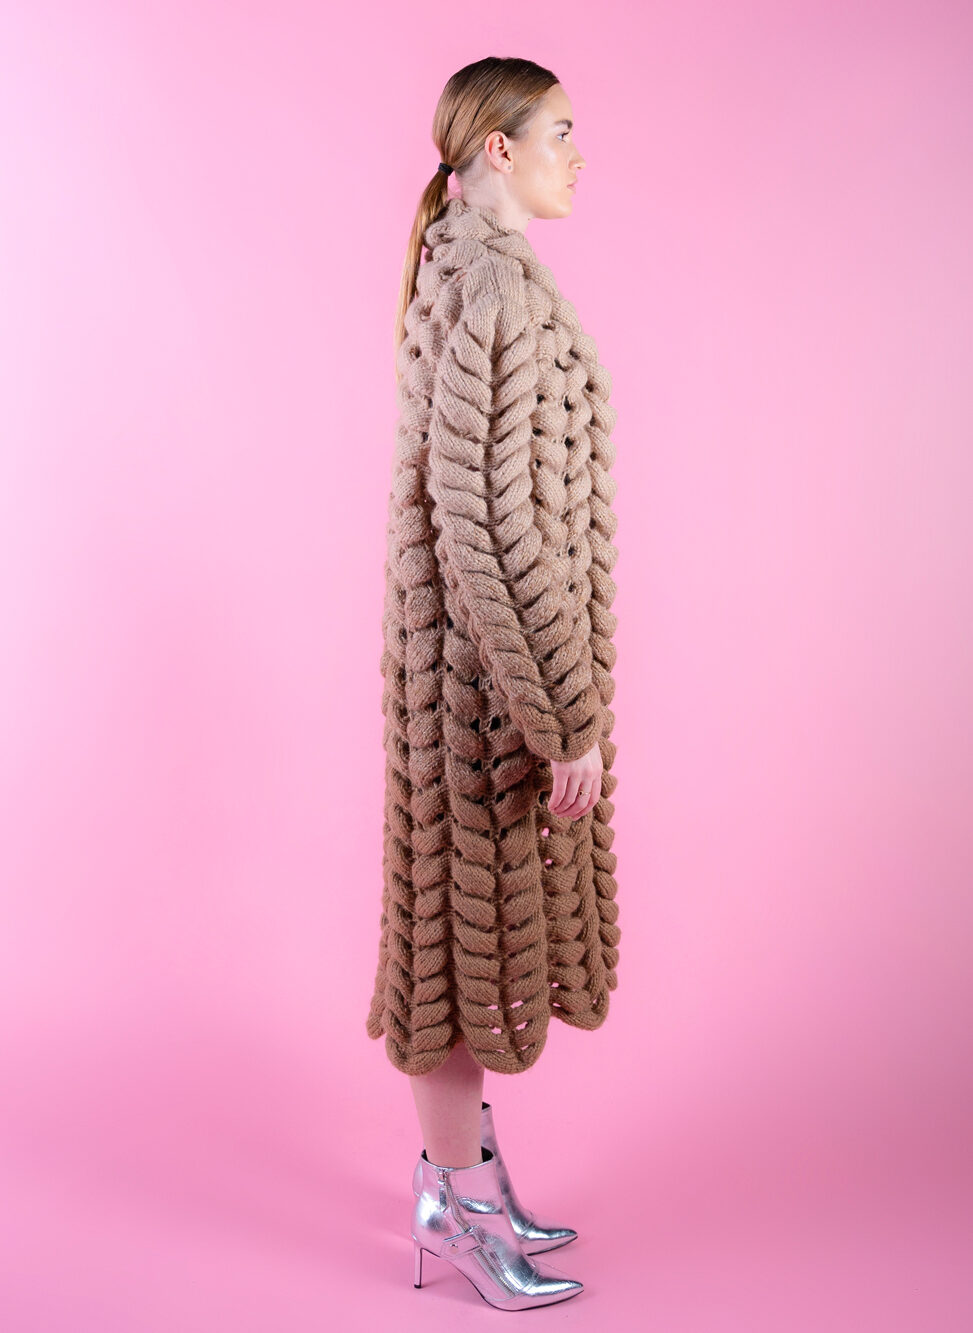 Amelie Wool Coat Cofee And walnut right view